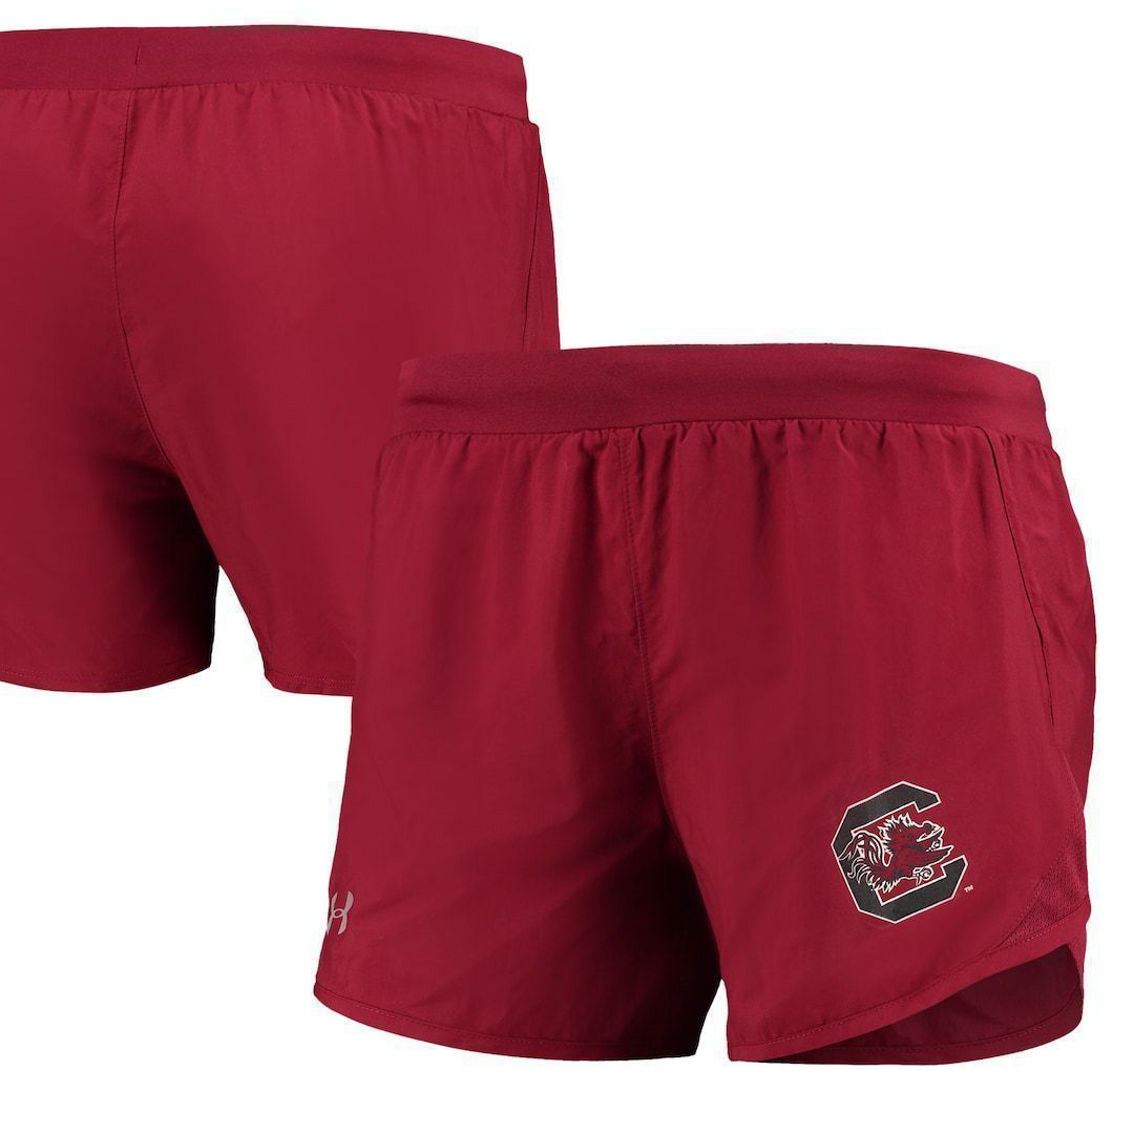 Under Armour Women's Garnet South Carolina Gamecocks Fly By Run 2.0 Performance Shorts - Image 2 of 4